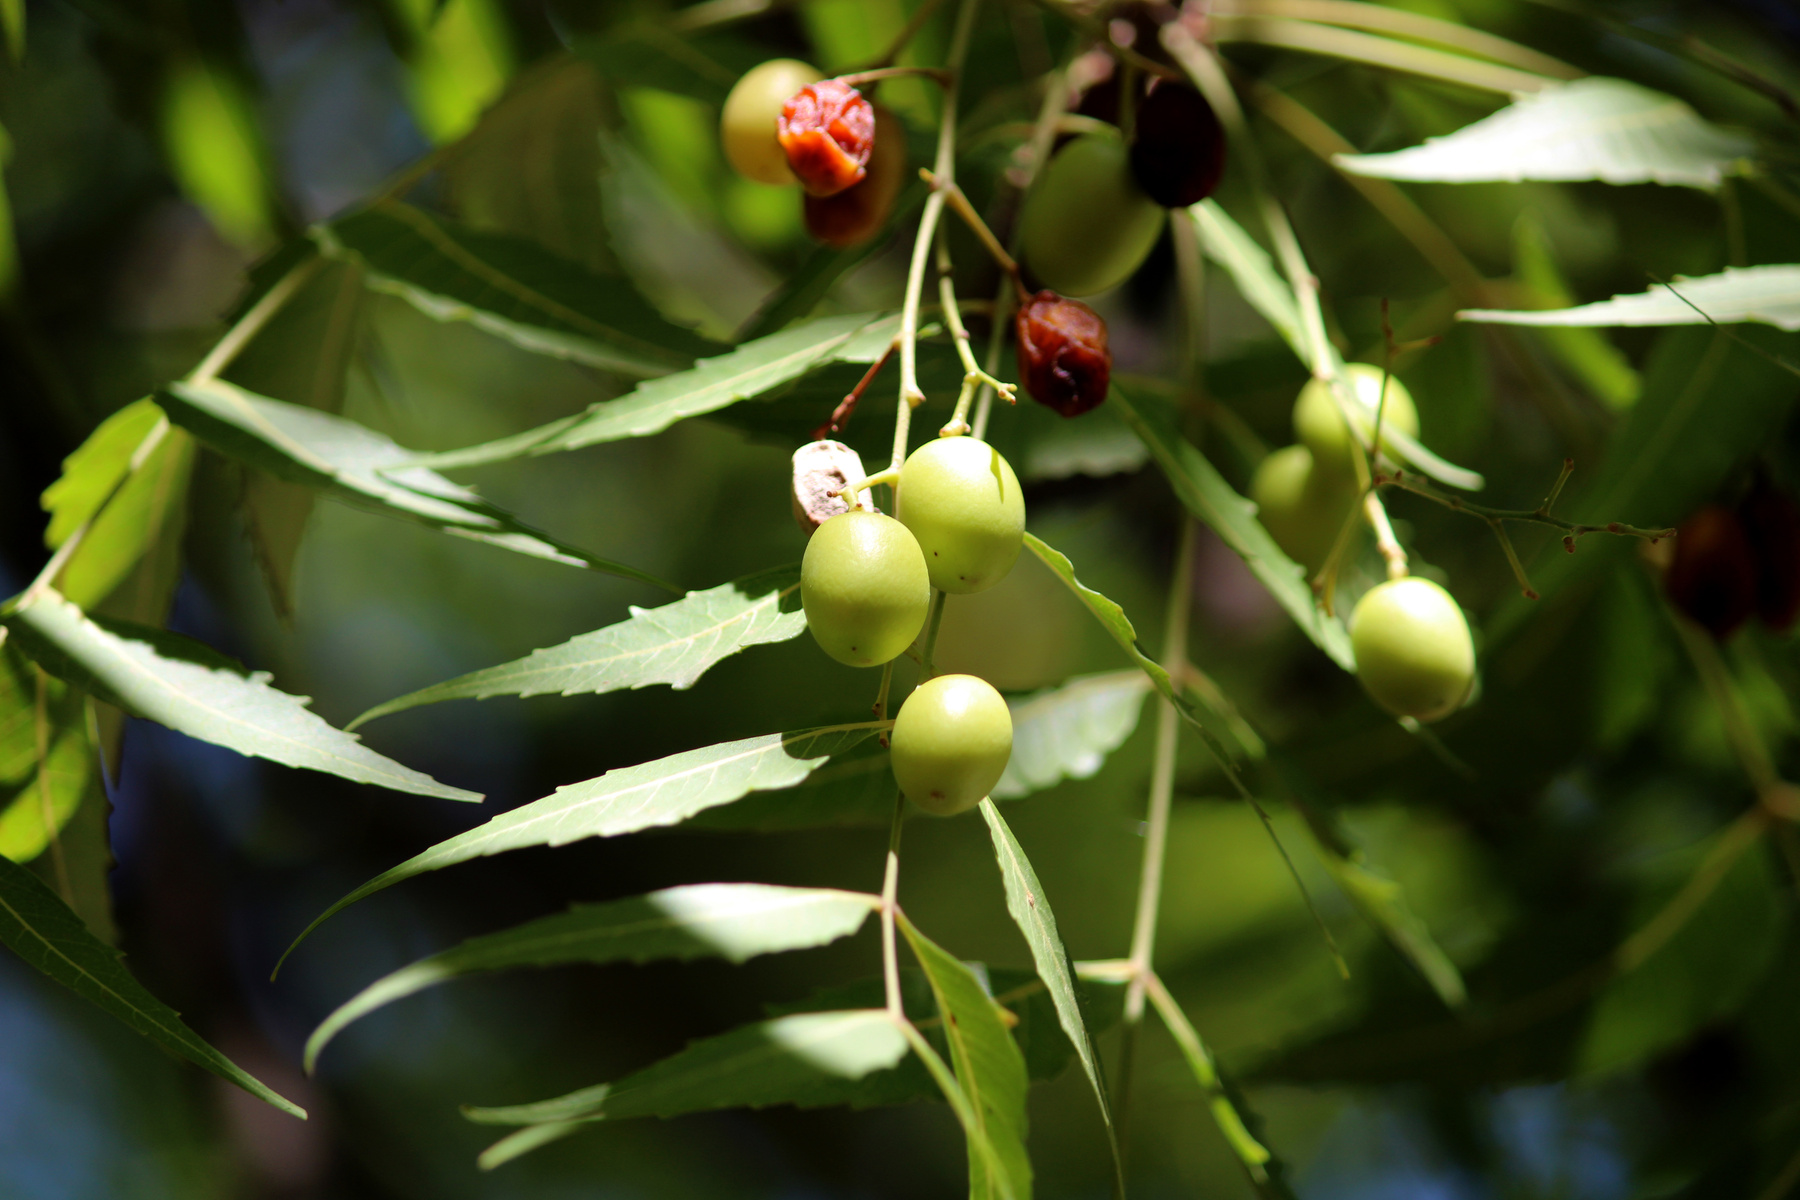 Neem Fruits Hanging on the Tree.